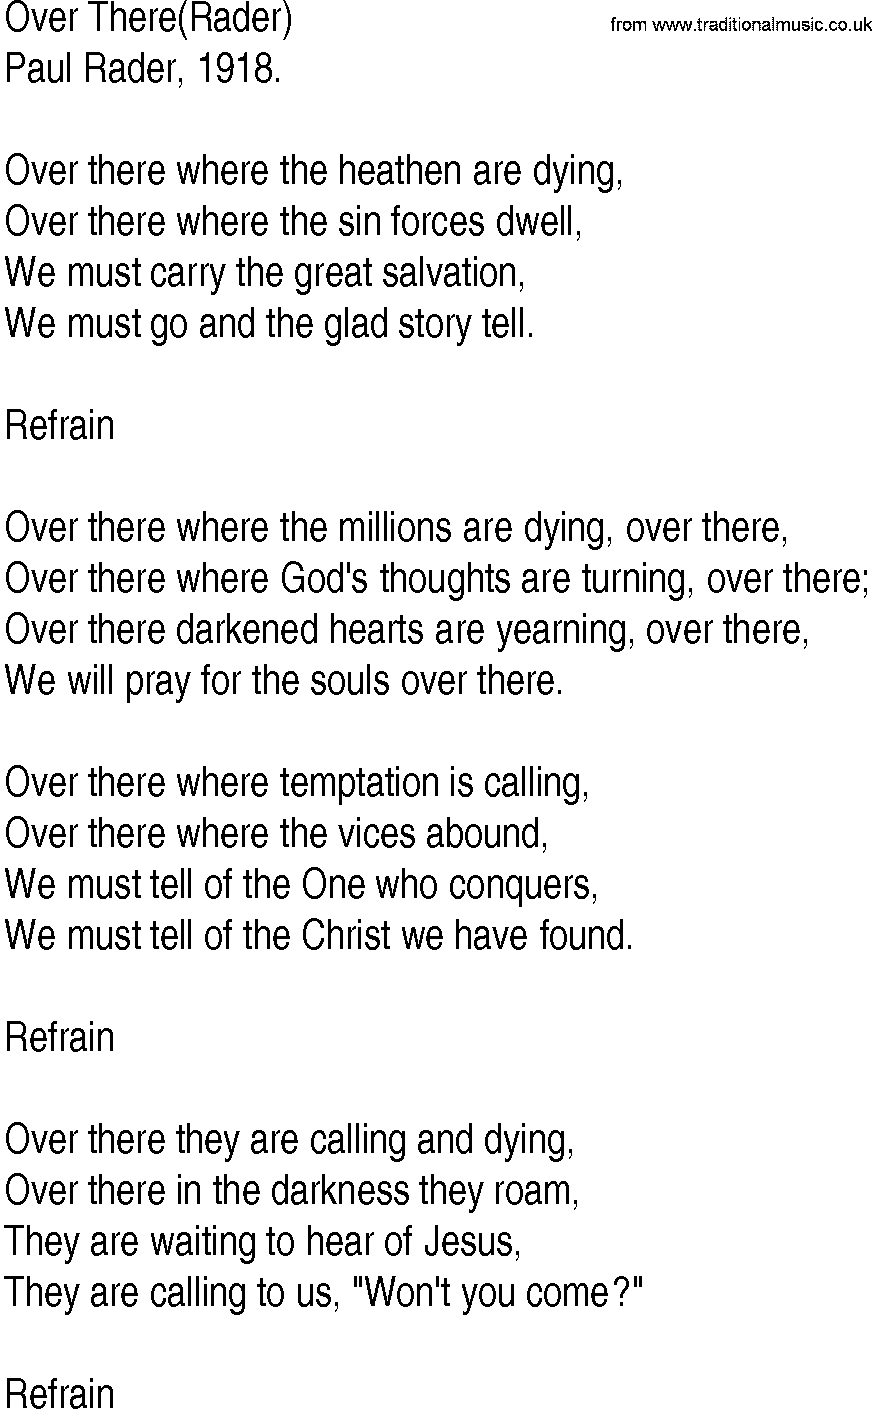 Hymn and Gospel Song: Over There(Rader) by Paul Rader lyrics